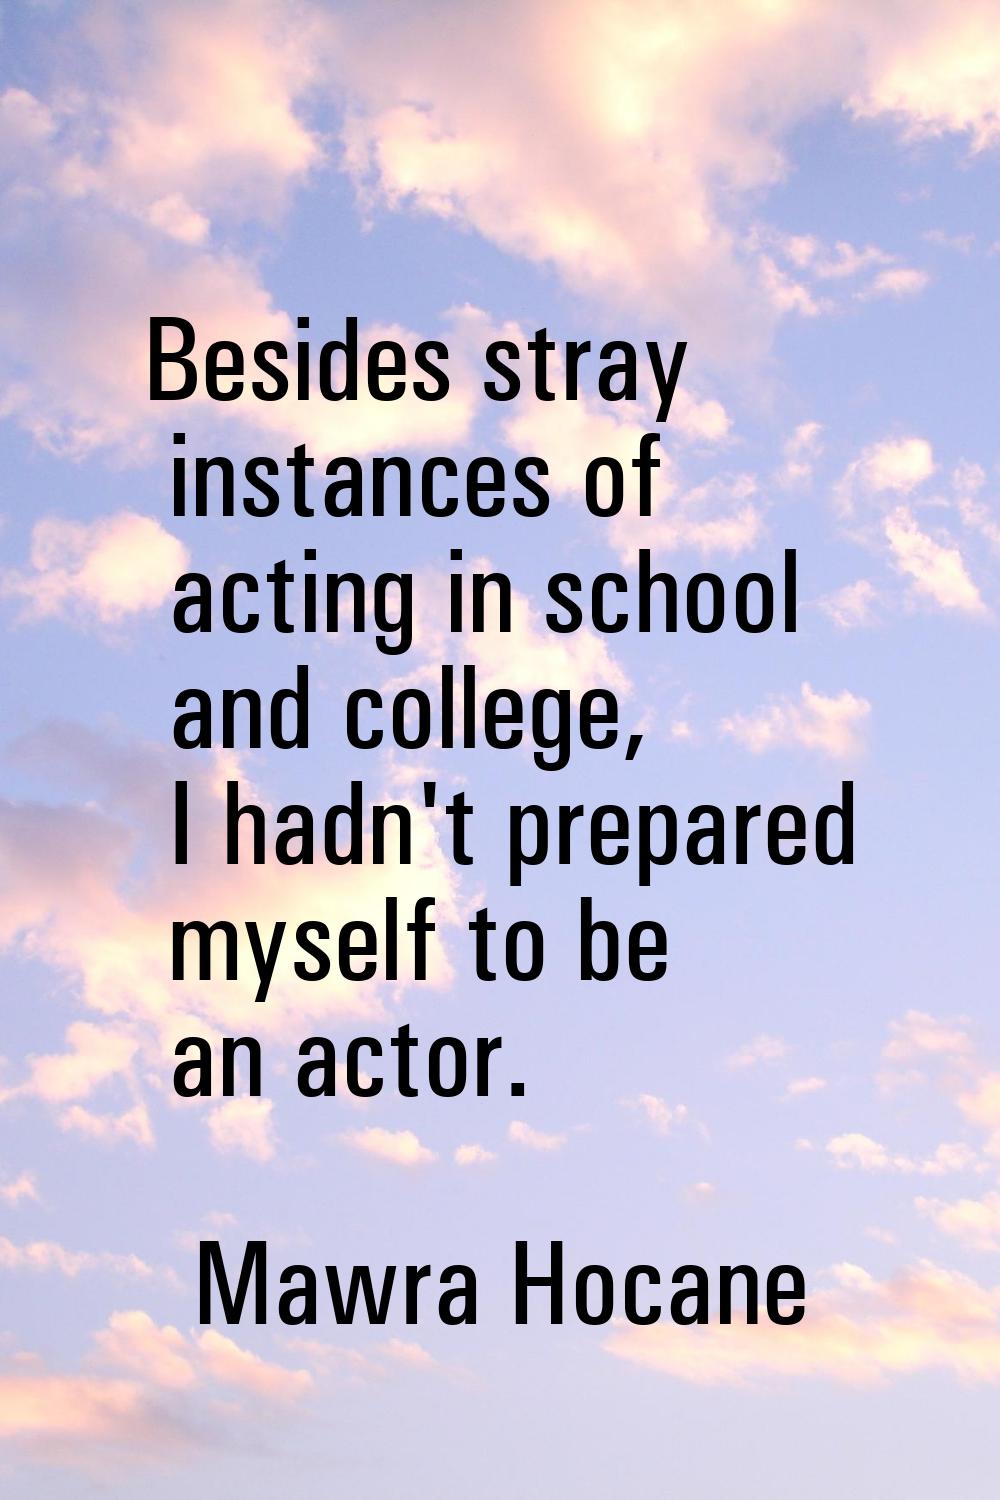 Besides stray instances of acting in school and college, I hadn't prepared myself to be an actor.